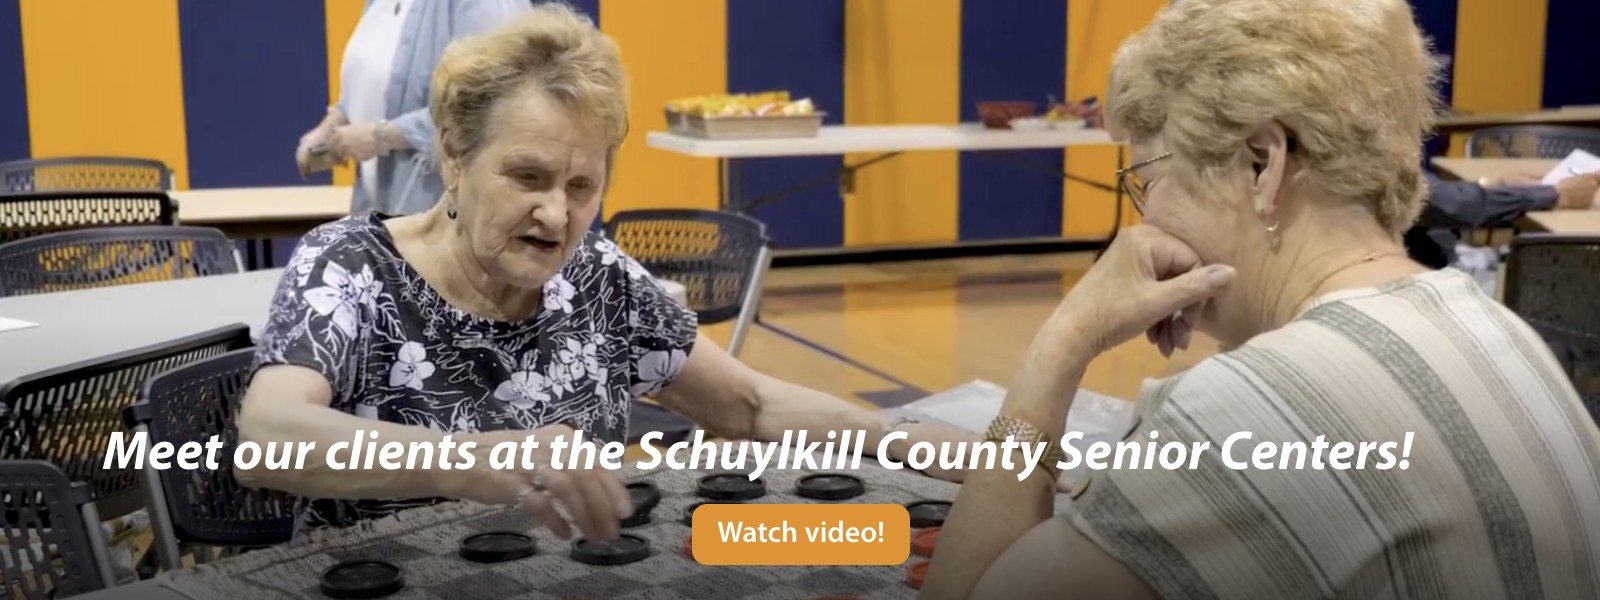 Meet our clients at the Schuylkill County Senior Centers slider image